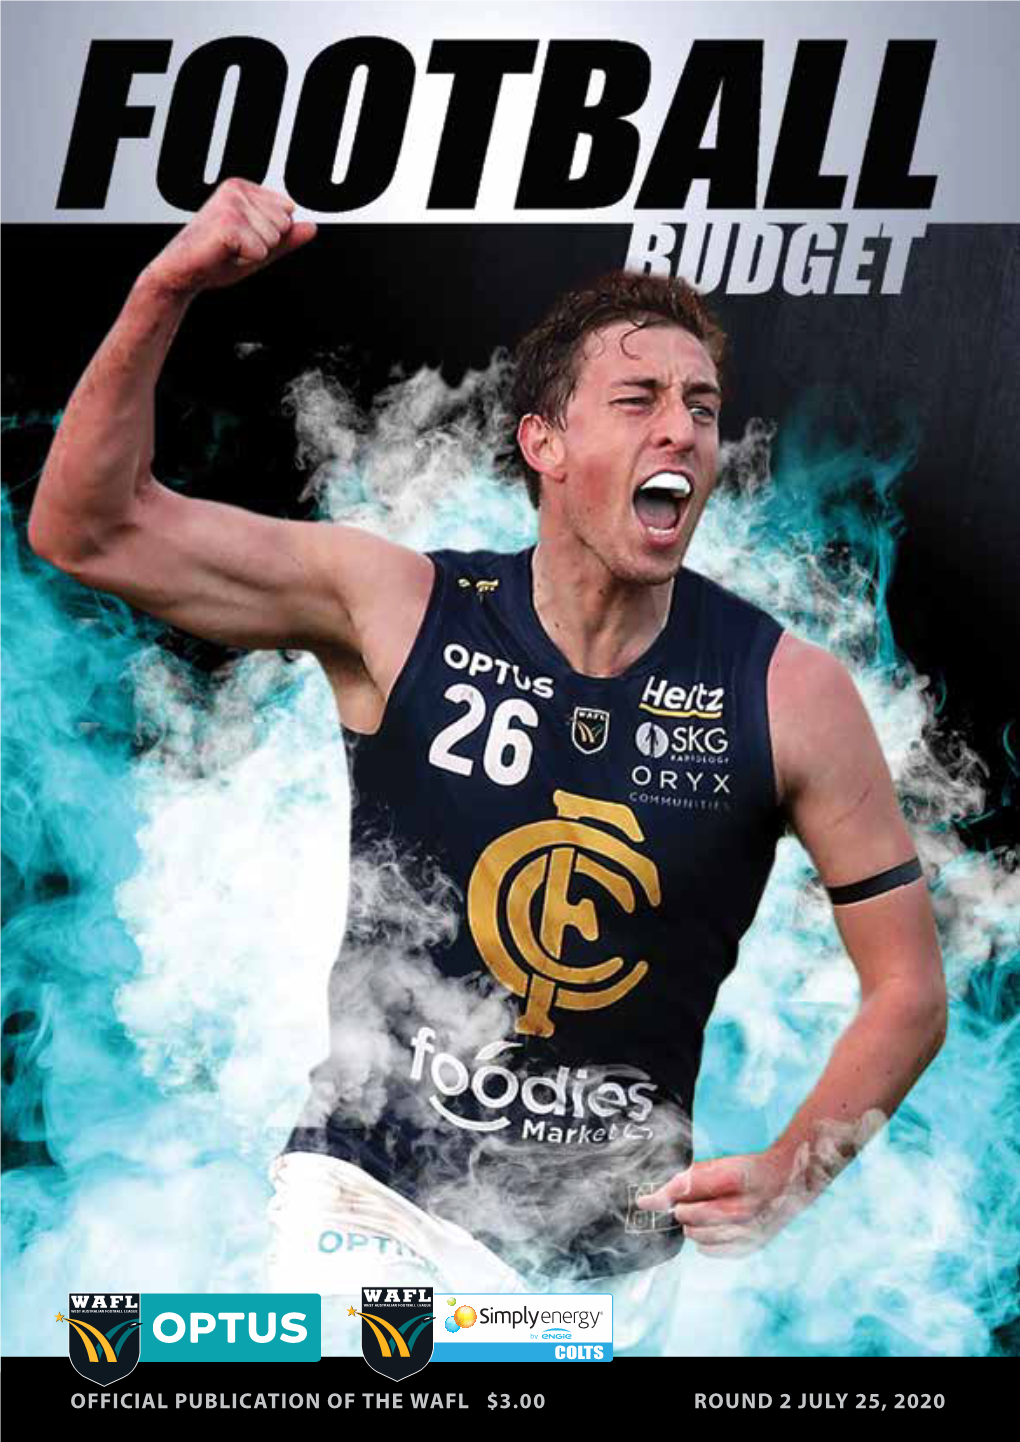 Round 2 July 25, 2020 Official Publication of the Wafl $3.00